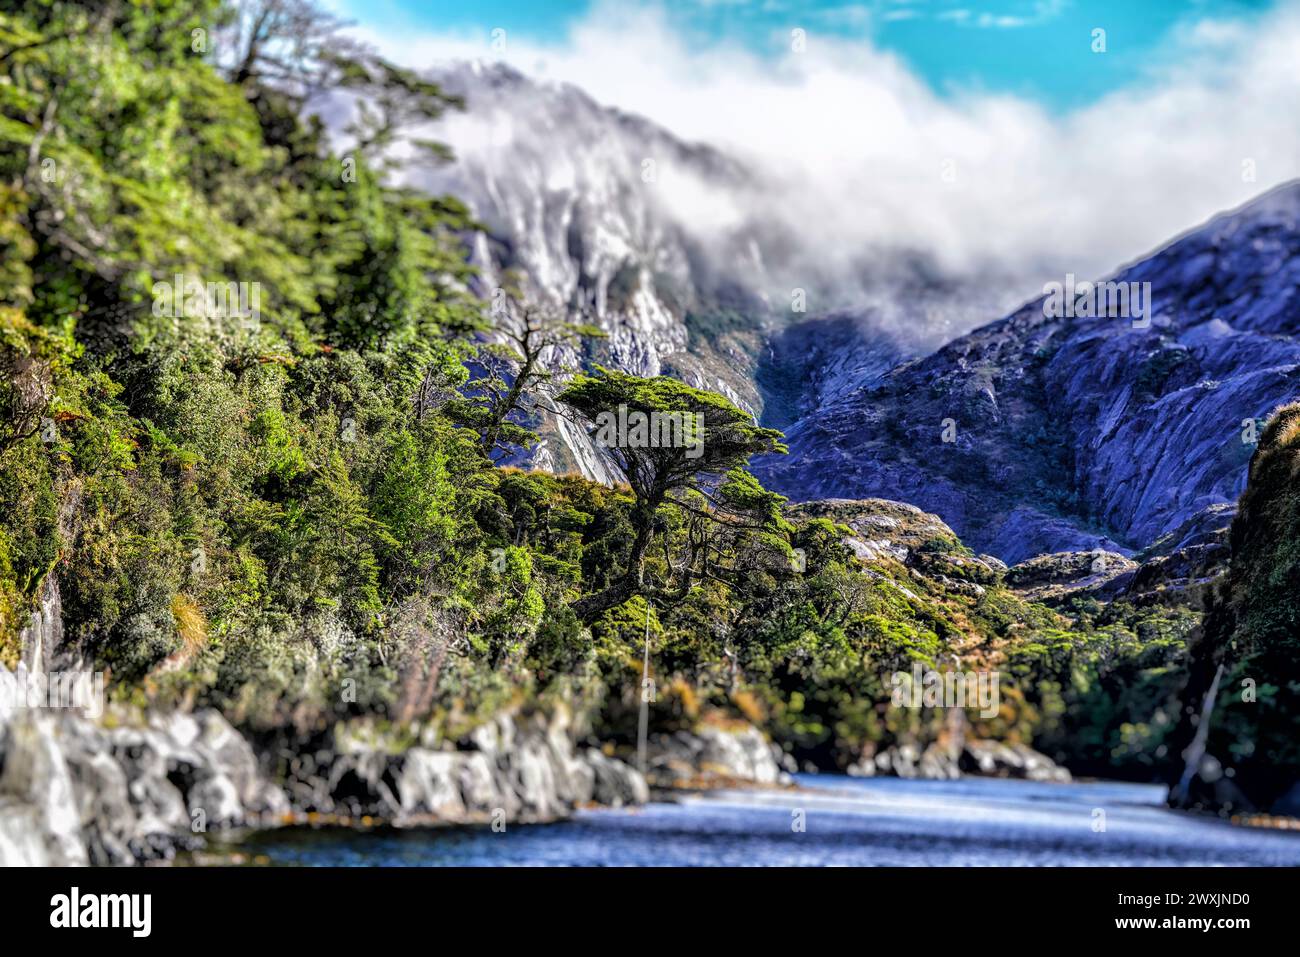 Puerto Profundo's landscape is adorned with characteristic vegetation, where dense evergreen forests and ancient trees, such as the towering Magellanic coihues and the resilient canelos, thrive in the cool, moist climate, creating a lush, green sanctuary in the heart of the Chilean Fjords. Stock Photo